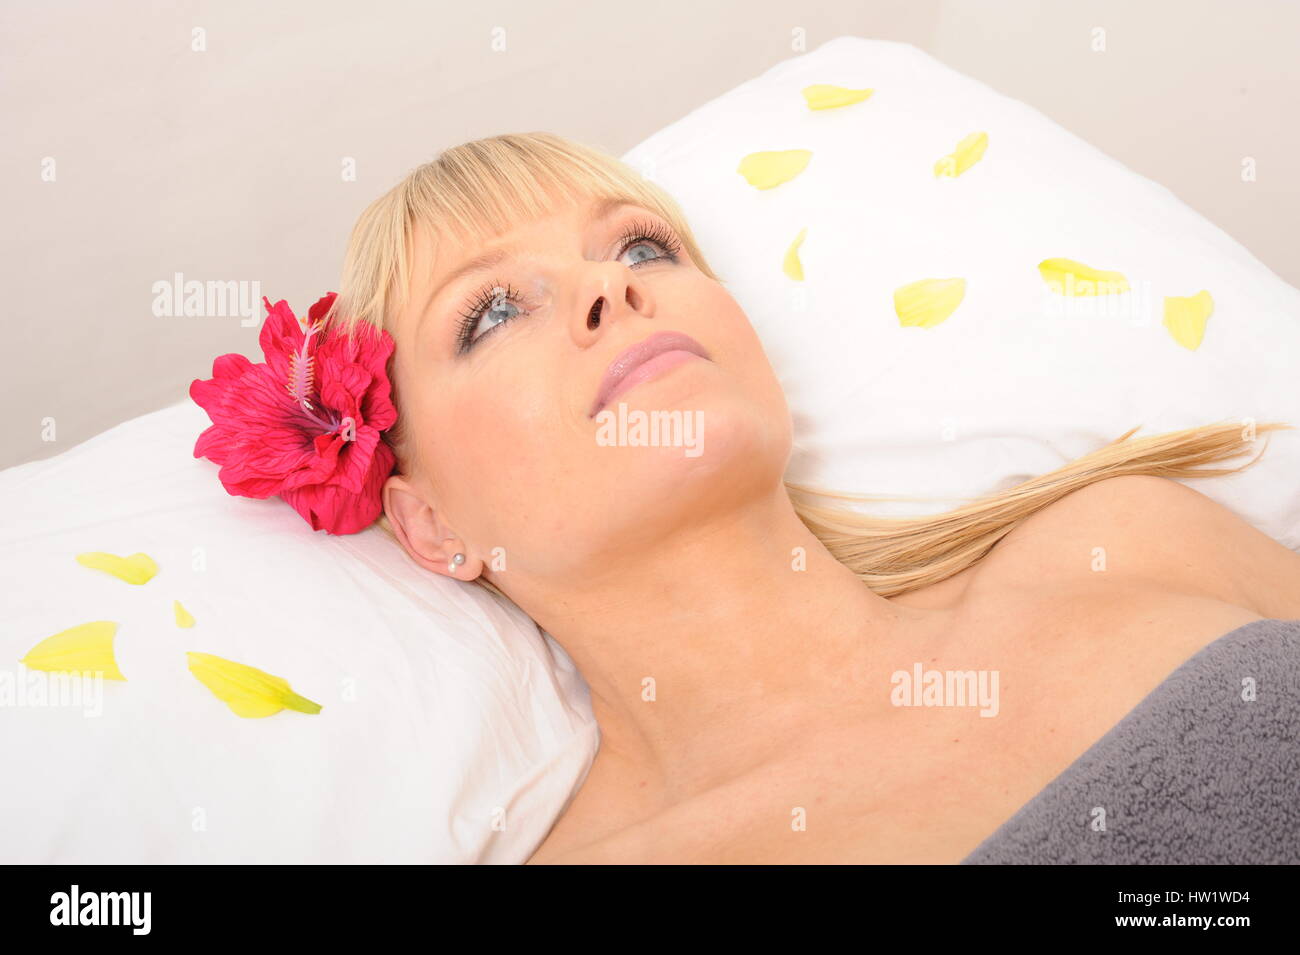 women relaxing at a health spa, Stock Photo